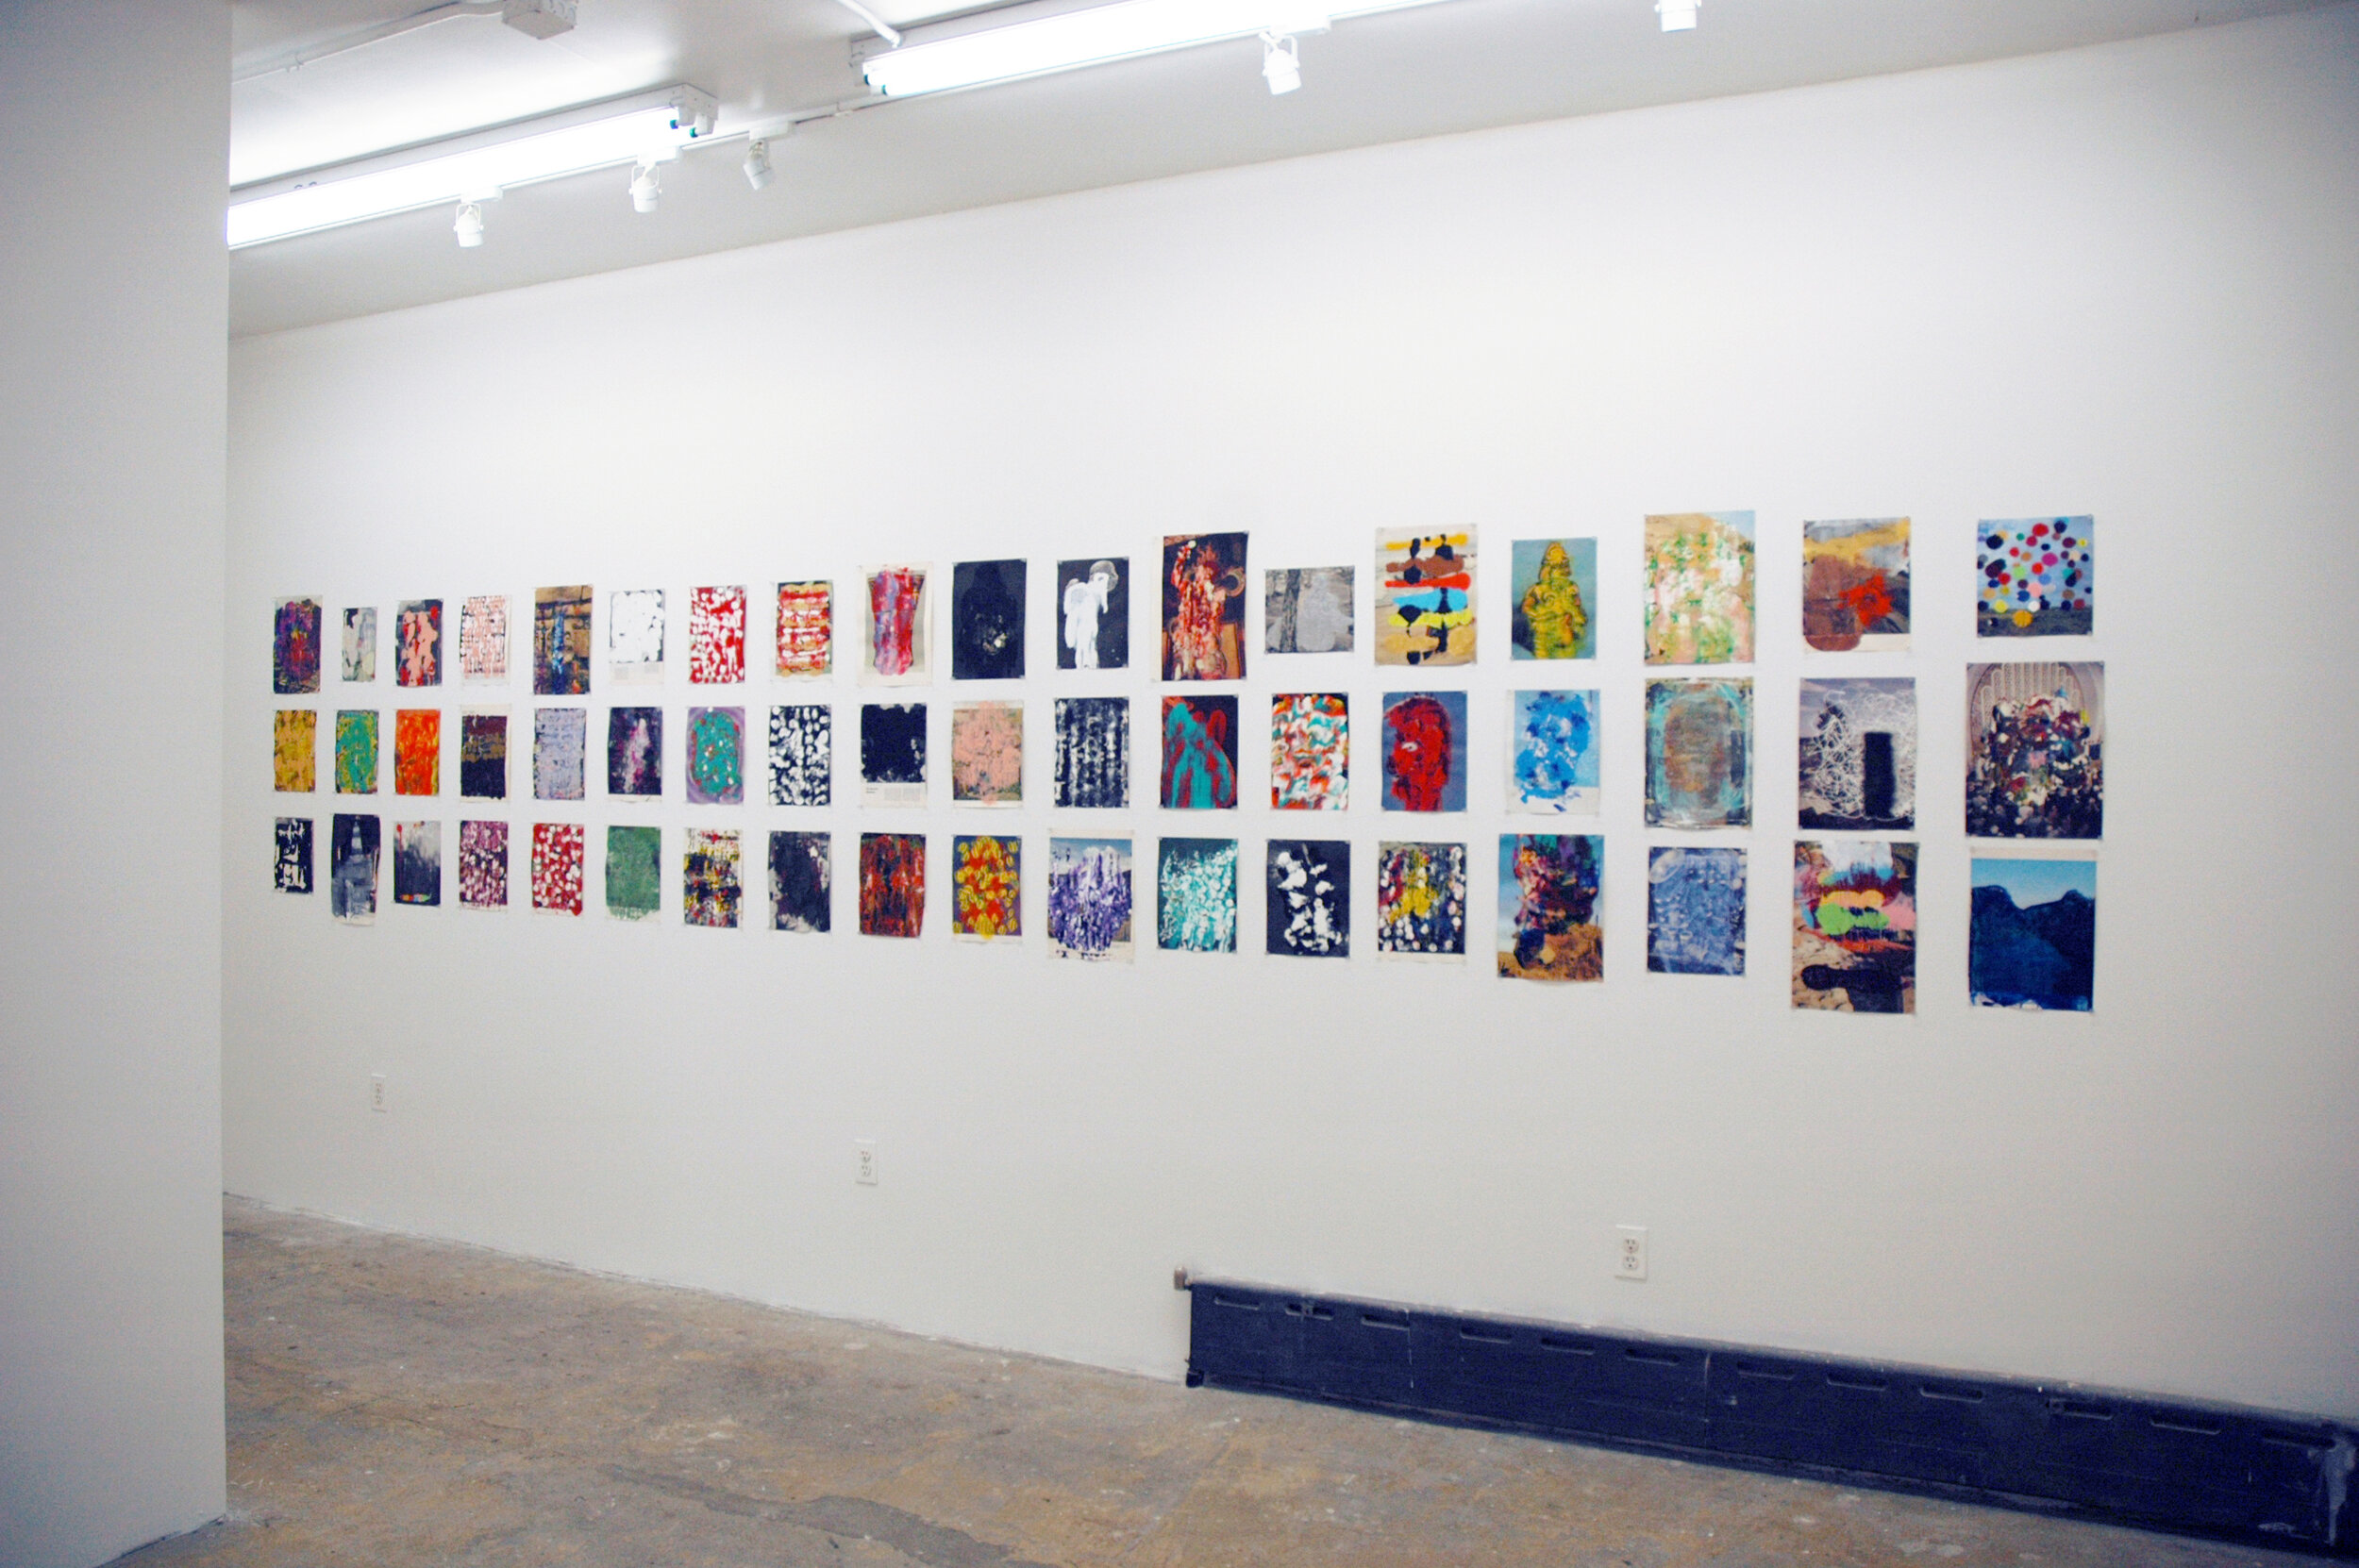 Installation image from the 2014 Rusty Shackleford exhibition, Repeater, at Cindy Rucker Gallery